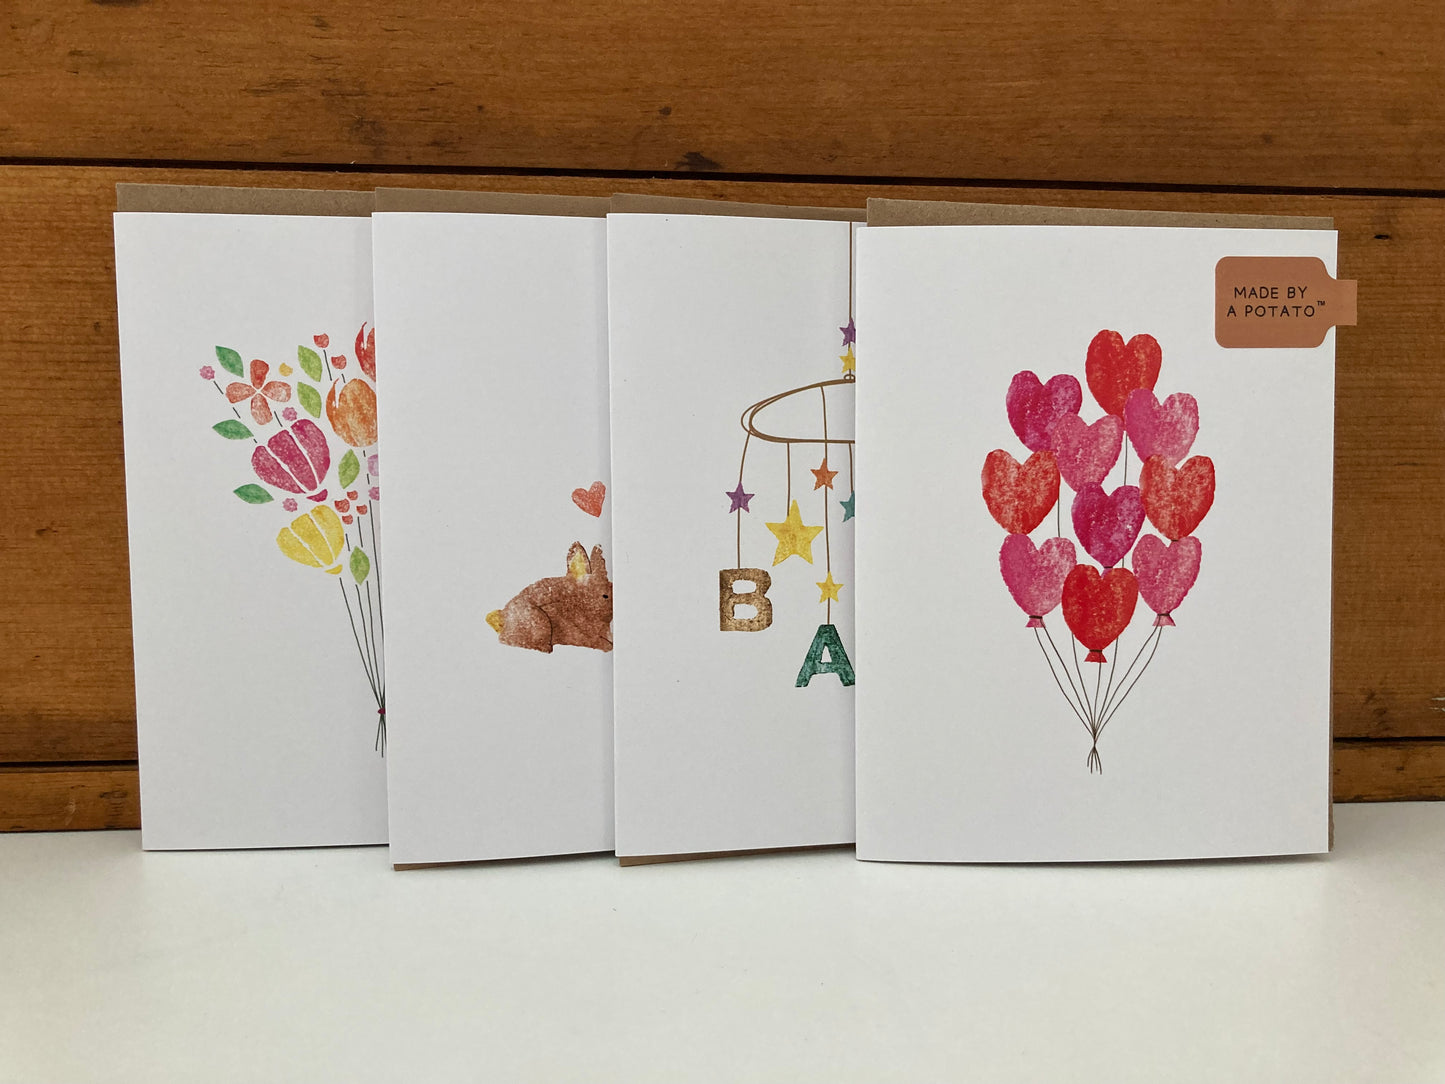 Greeting Cards - By a Potato SAY IT WITH FLOWERS